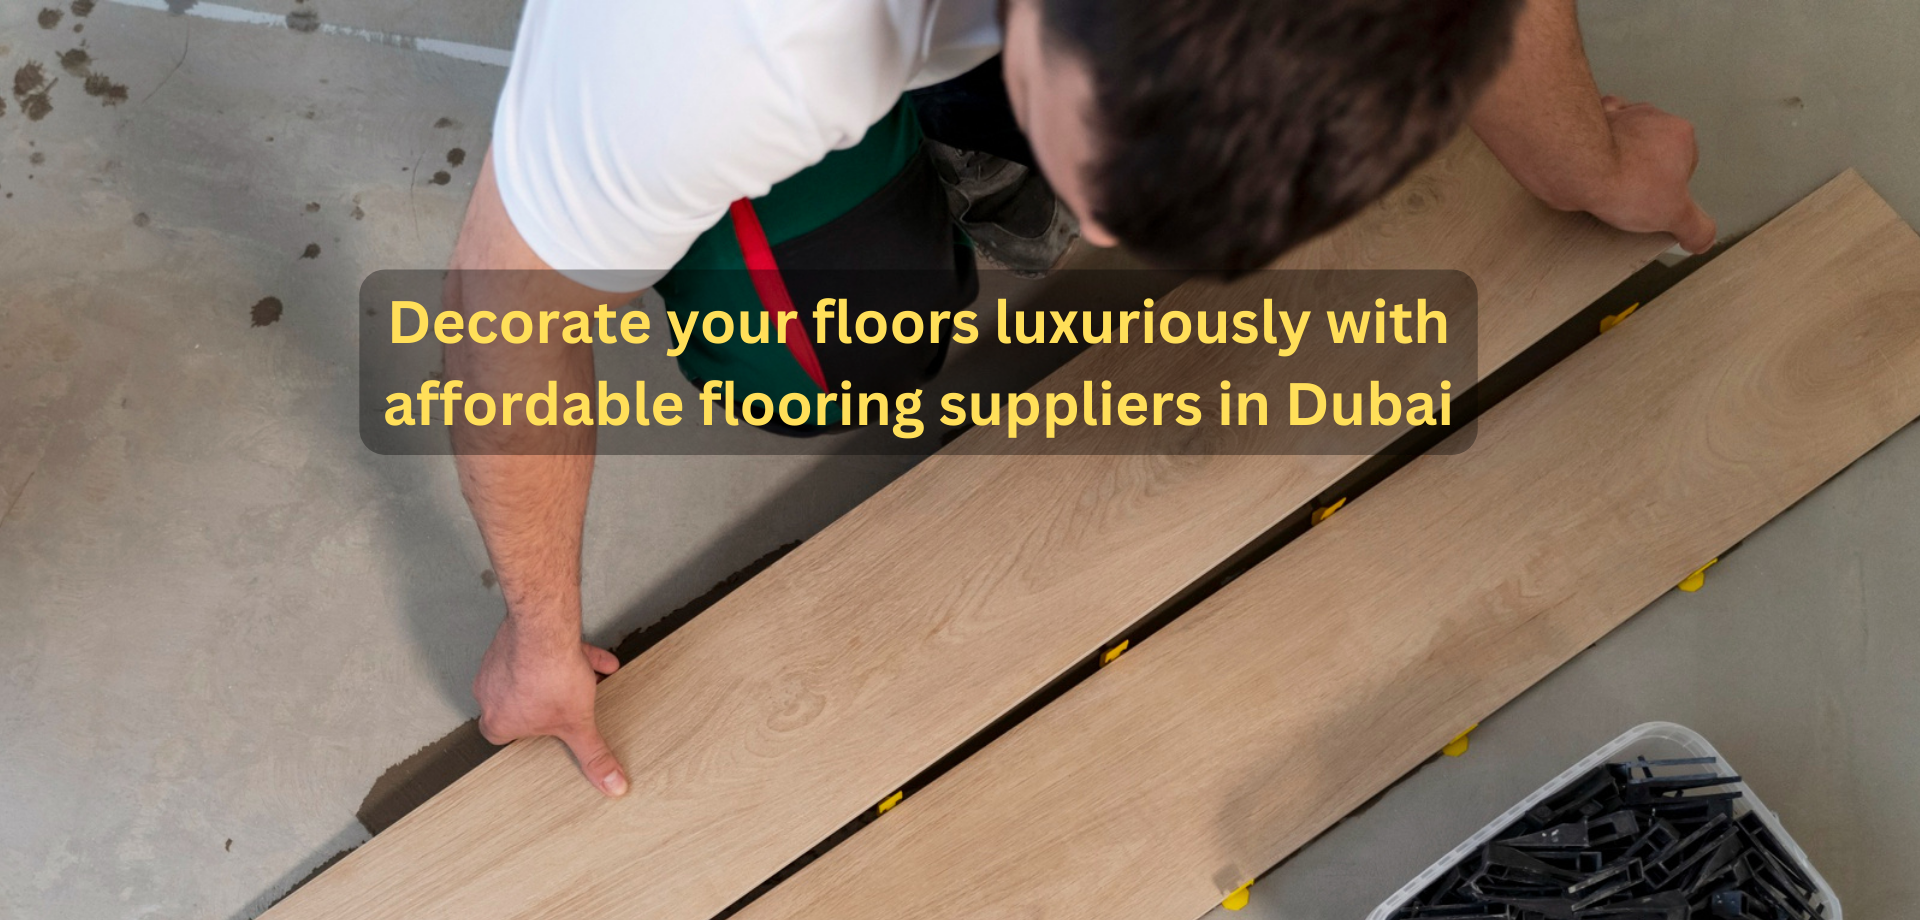 Decorate your floors luxuriously with affordable flooring suppliers in Dubai